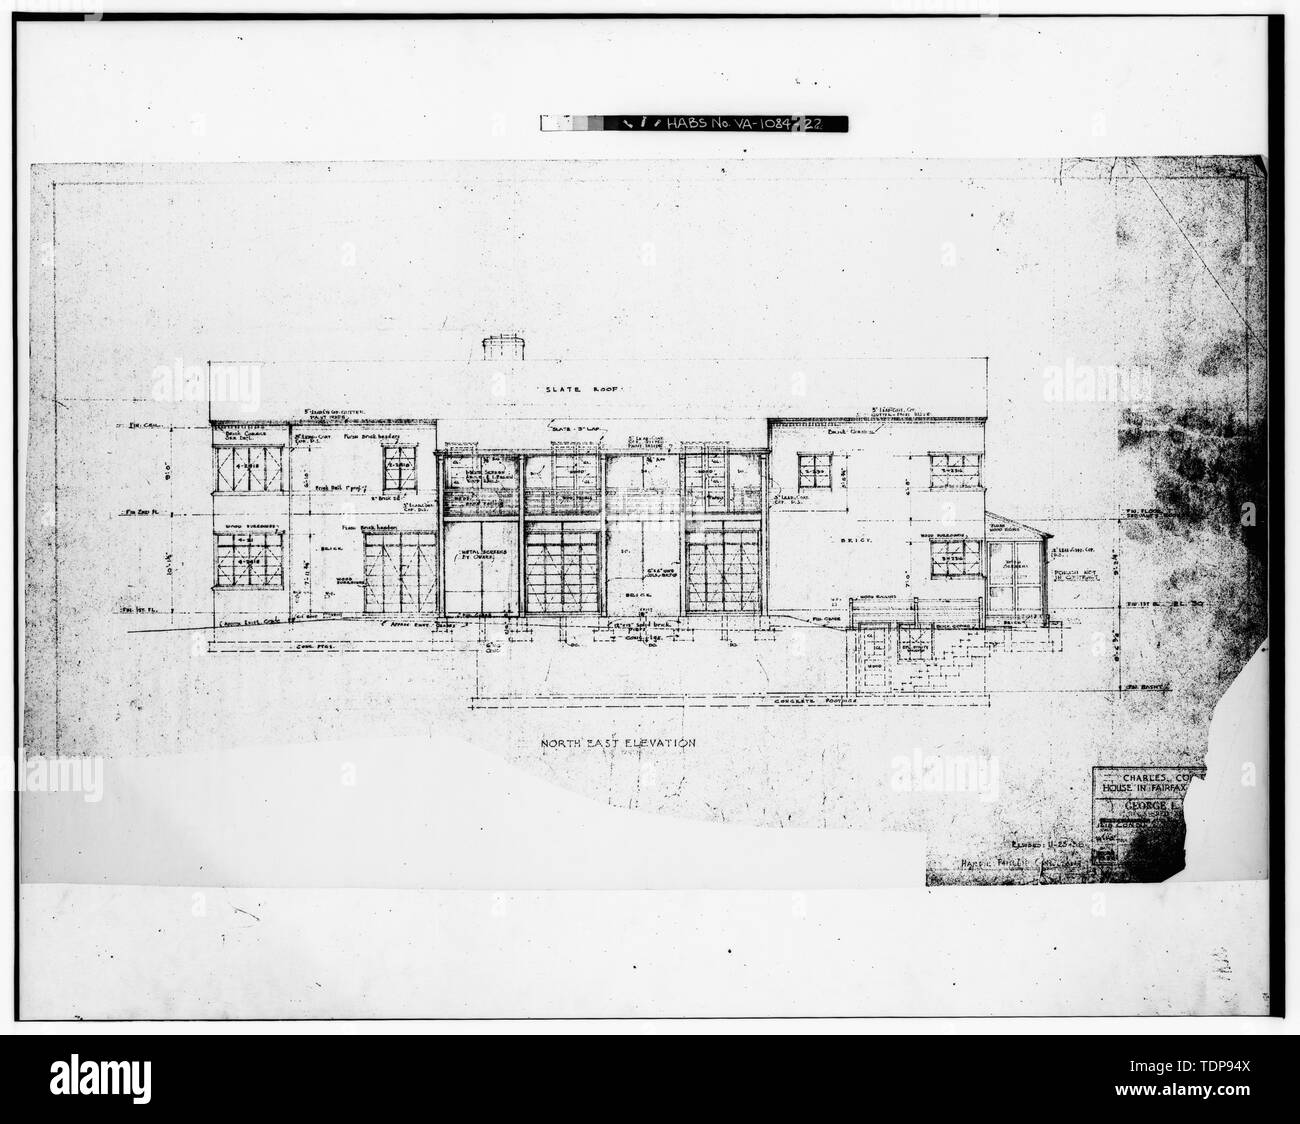 Photocopy of blackline print in possession of Mrs. William L. Reno. Original drawing by George Locke Howe, Architect 1938. 'NORTH EAST ELEVATION' - Mr. and Mrs. Charles Collier House, 6080 Leesburg Pike, Falls Church, Falls Church, VA; Howe, George Locke; Keily, Dan; Morris, Scott, transmitter Stock Photo